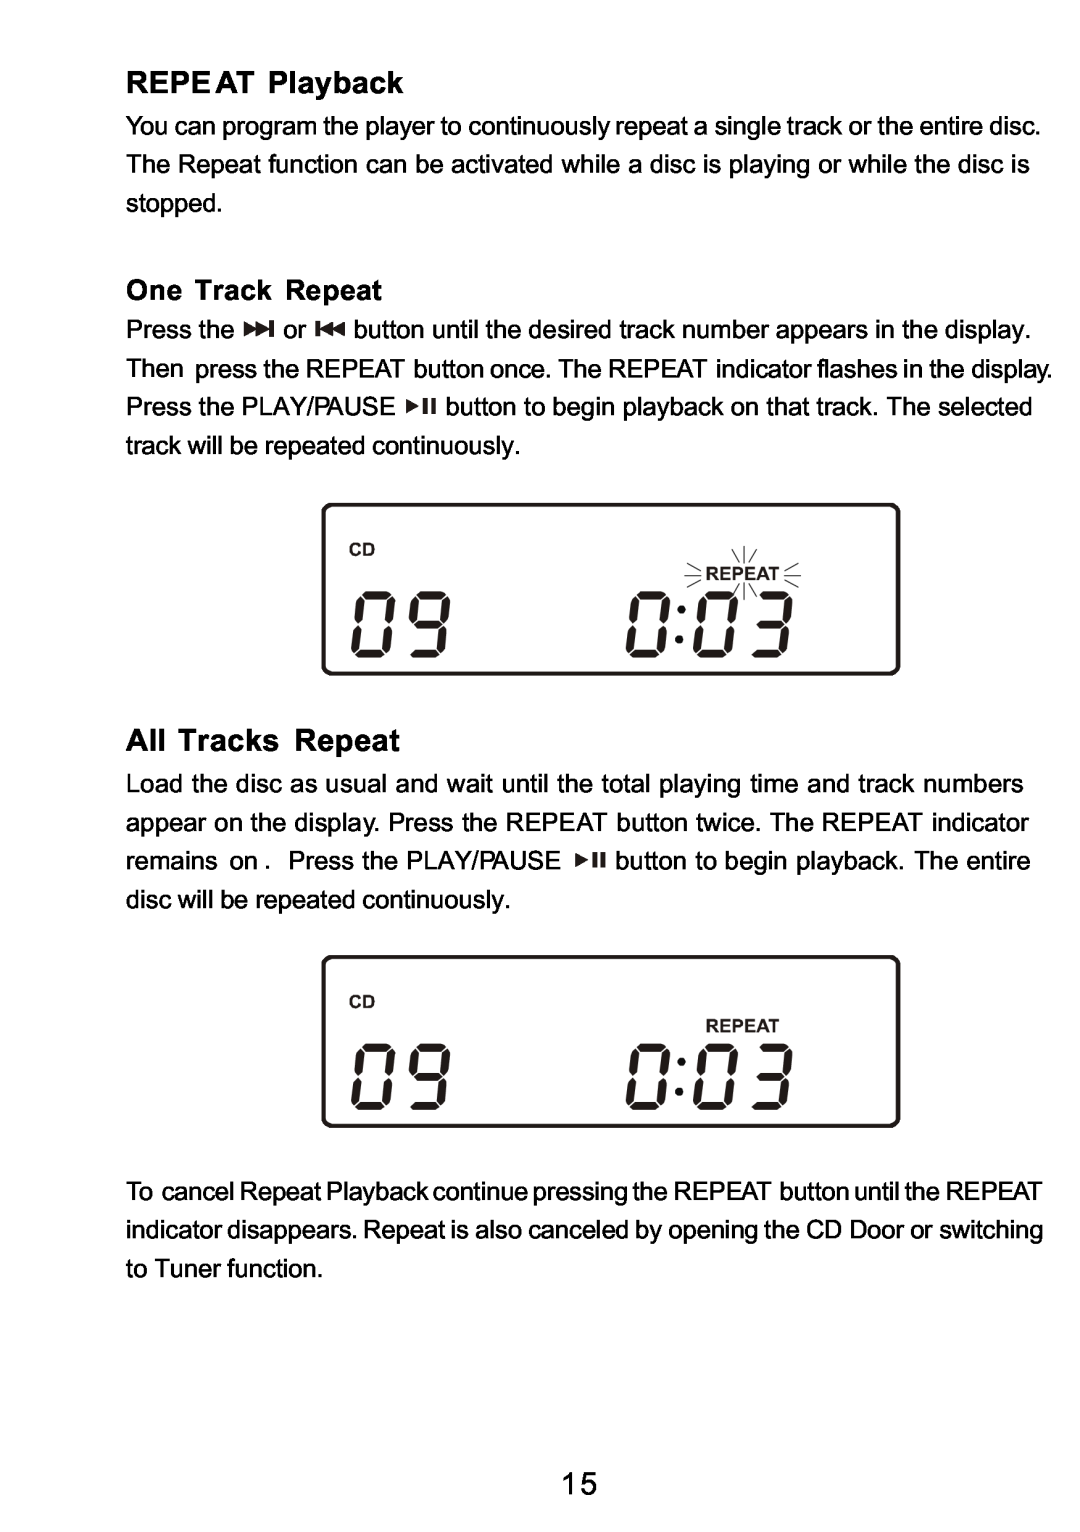 Sylvania SRCD3830 instruction manual REPEAT Playback, All Tracks Repeat, One Track Repeat 